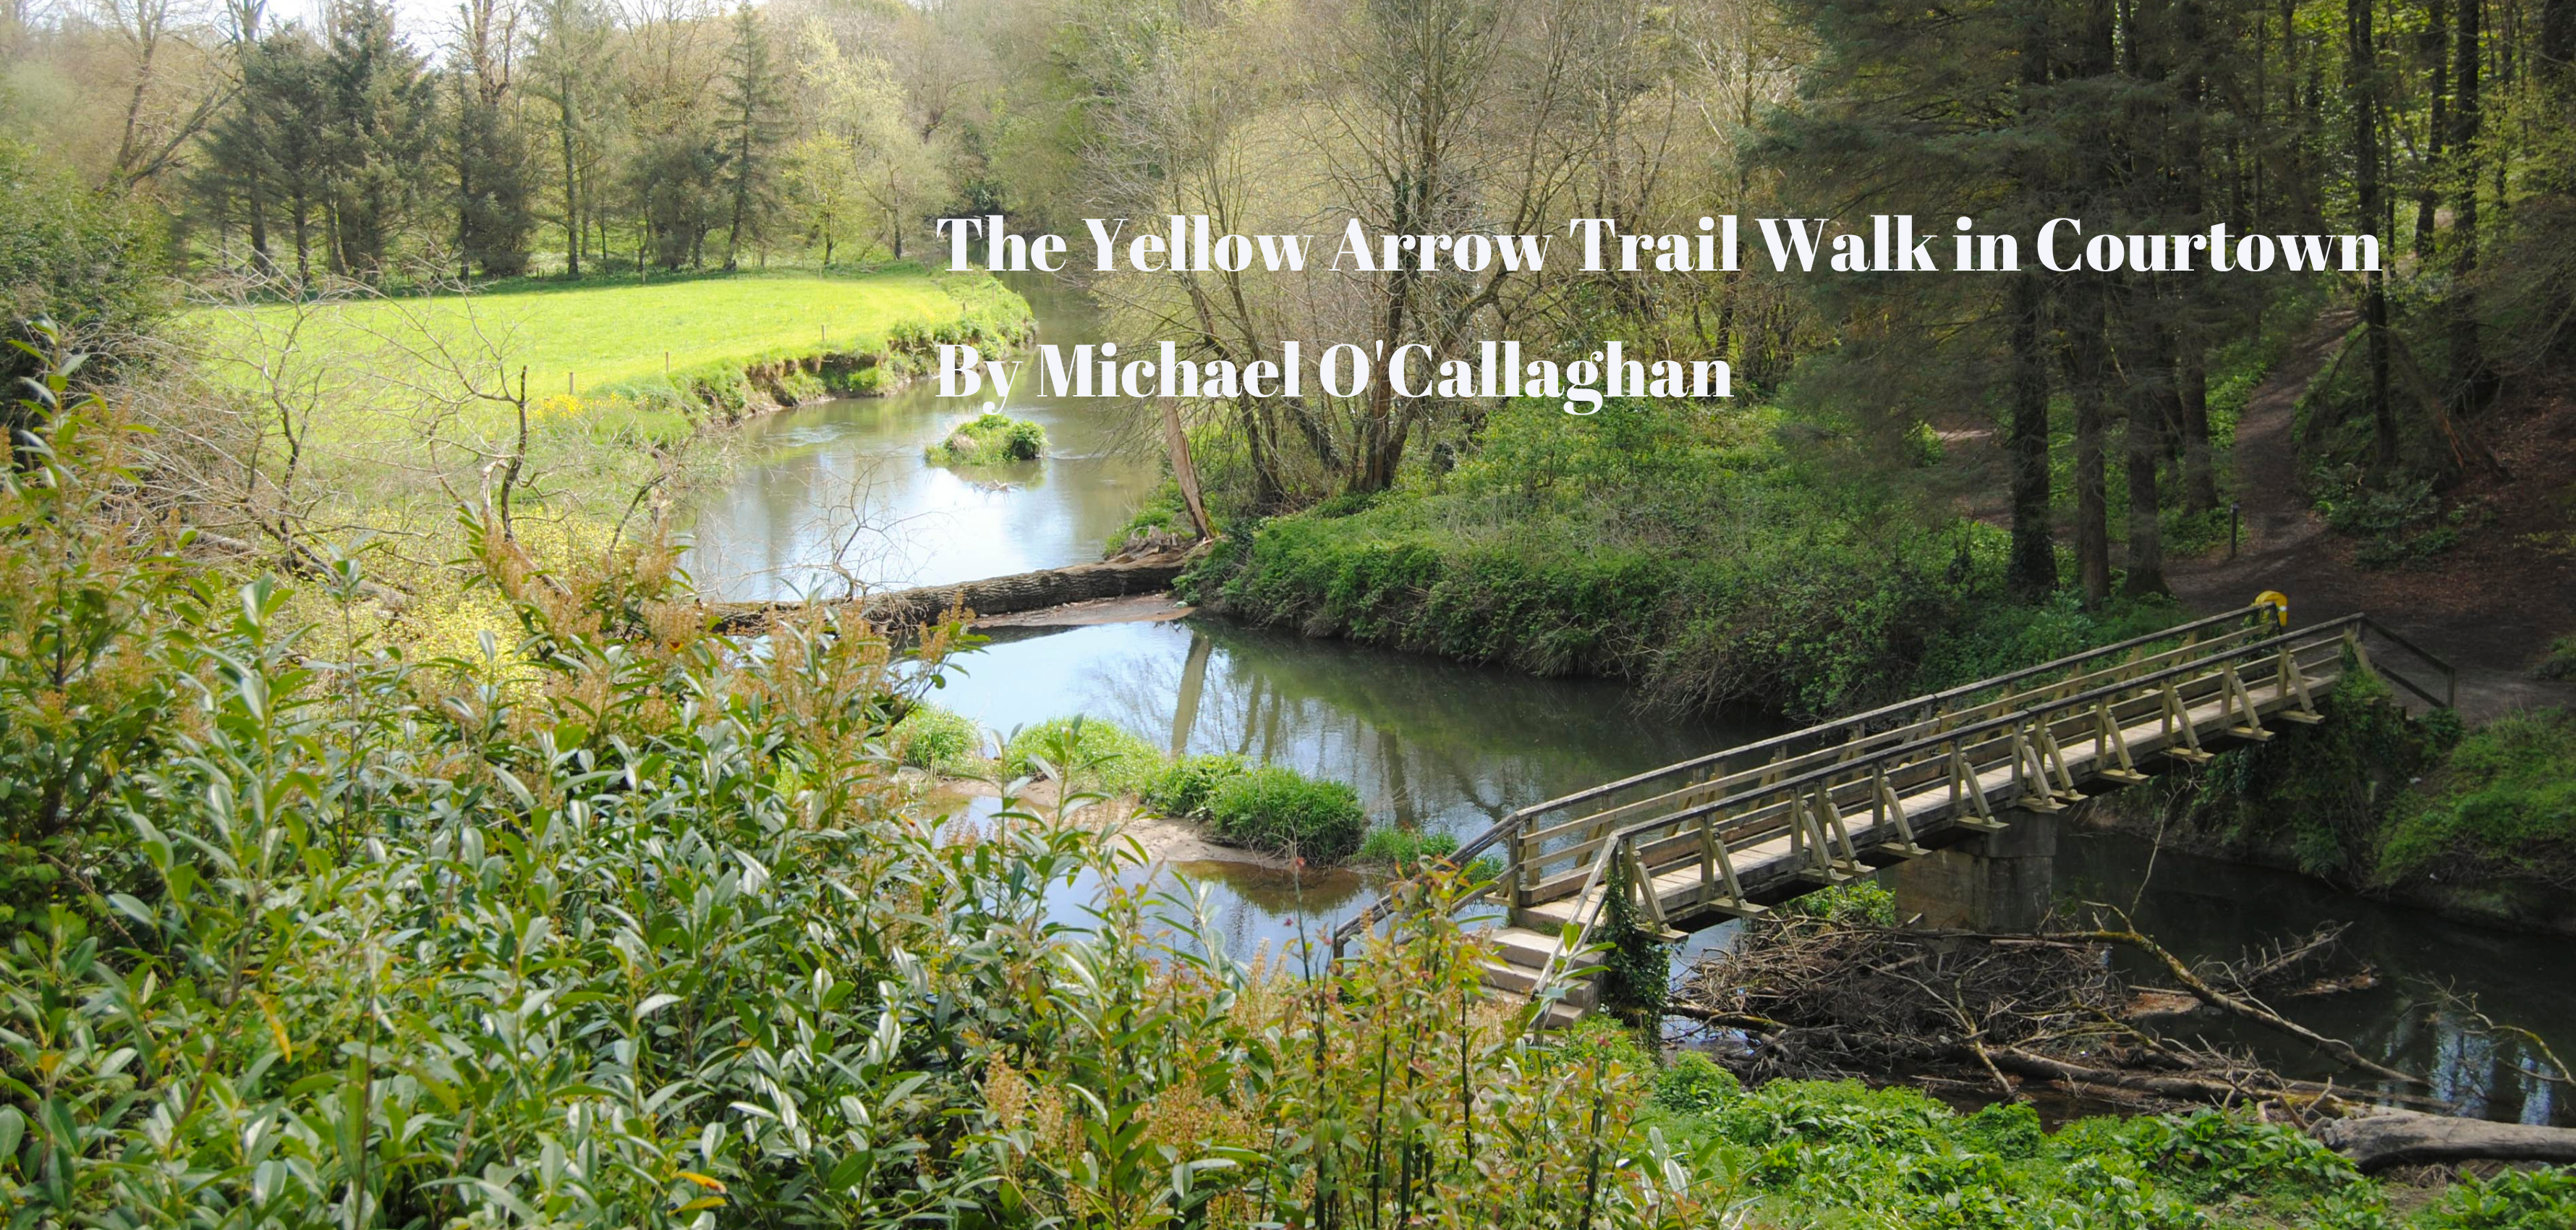 The Yellow Arrow Trail Walk in Courtown